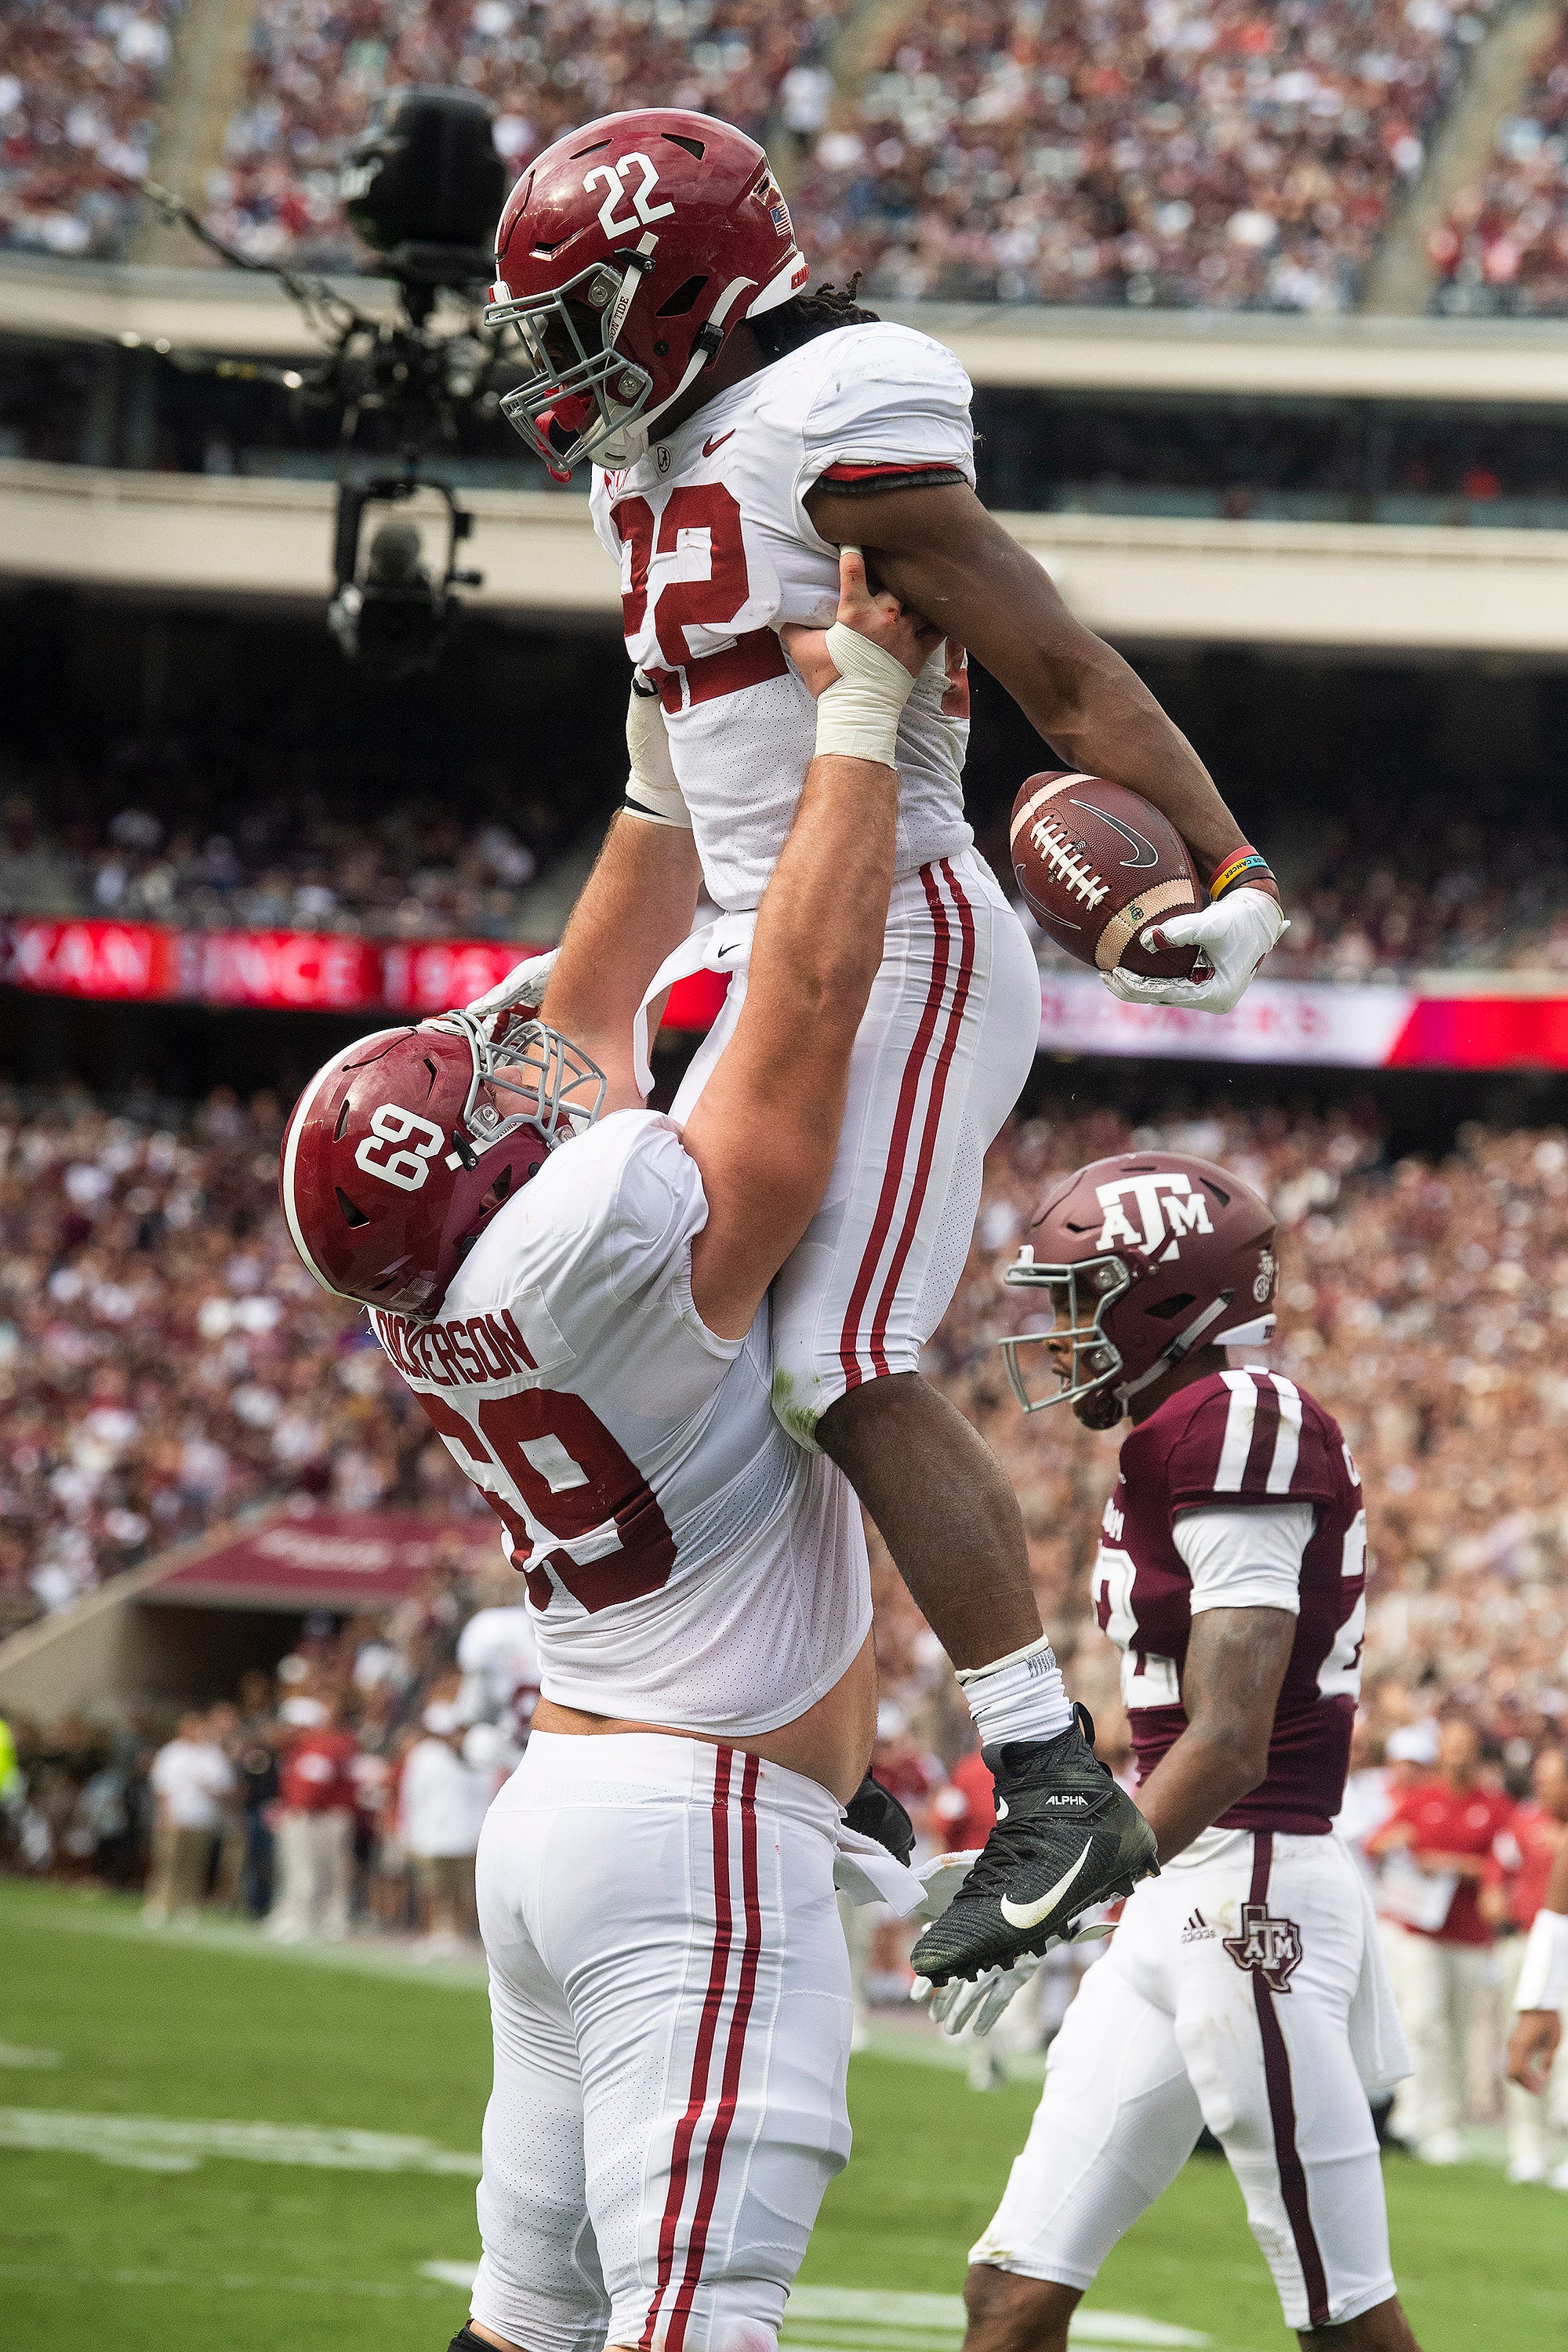 Alabama running back Najee Harris (22) is lifter by Alabama offensive lineman Landon Dickerson (69) after scoring a touchdown against Texas A&M at Kyle Field in College Station, Texas on Saturday October 12, 2019.